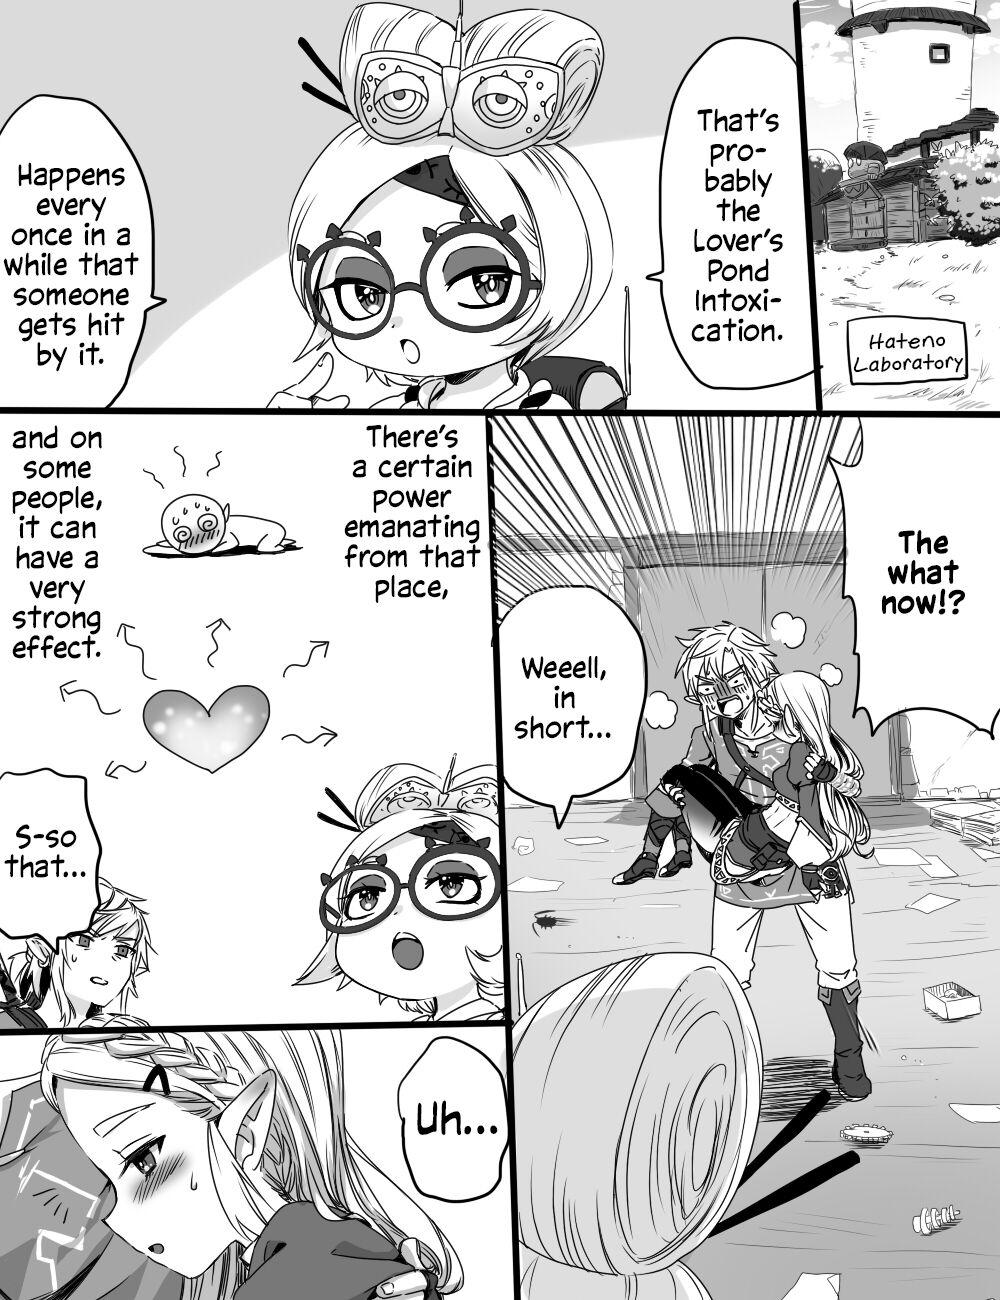 Bulge Love Pond Power | The Power of the Lover's Pond - The legend of zelda Babes - Page 4